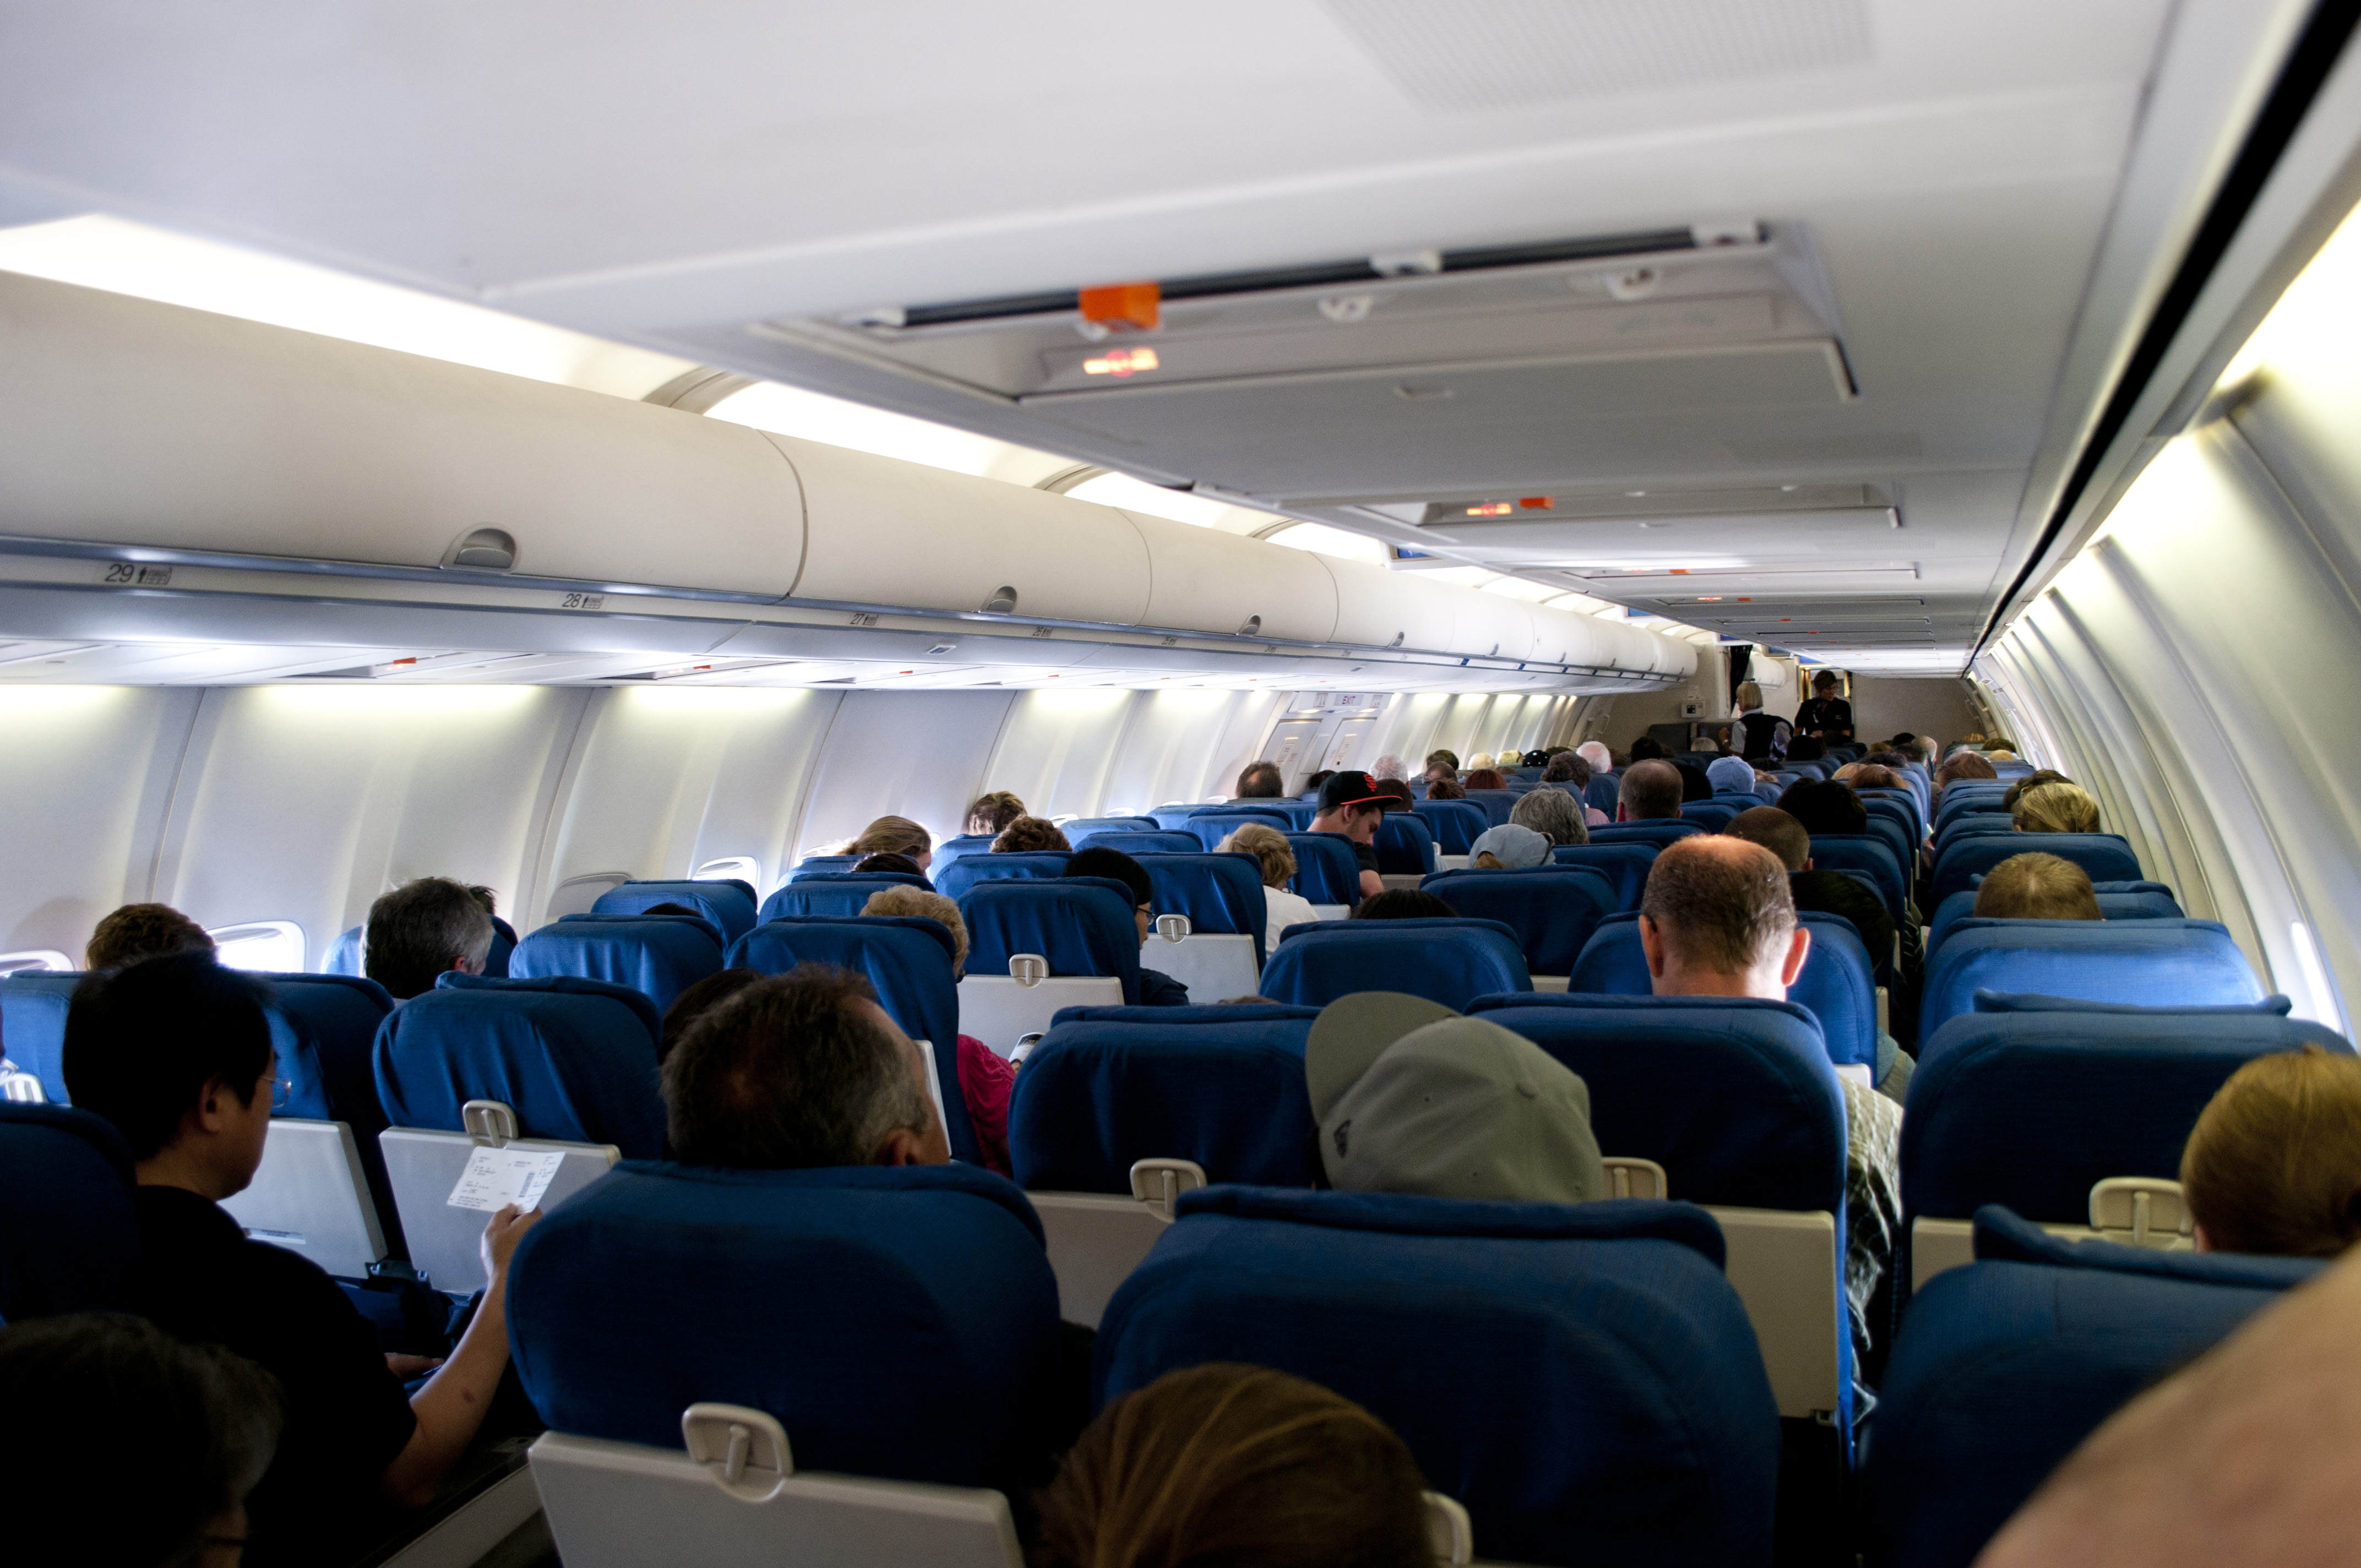 Interior of commercial airliner photo